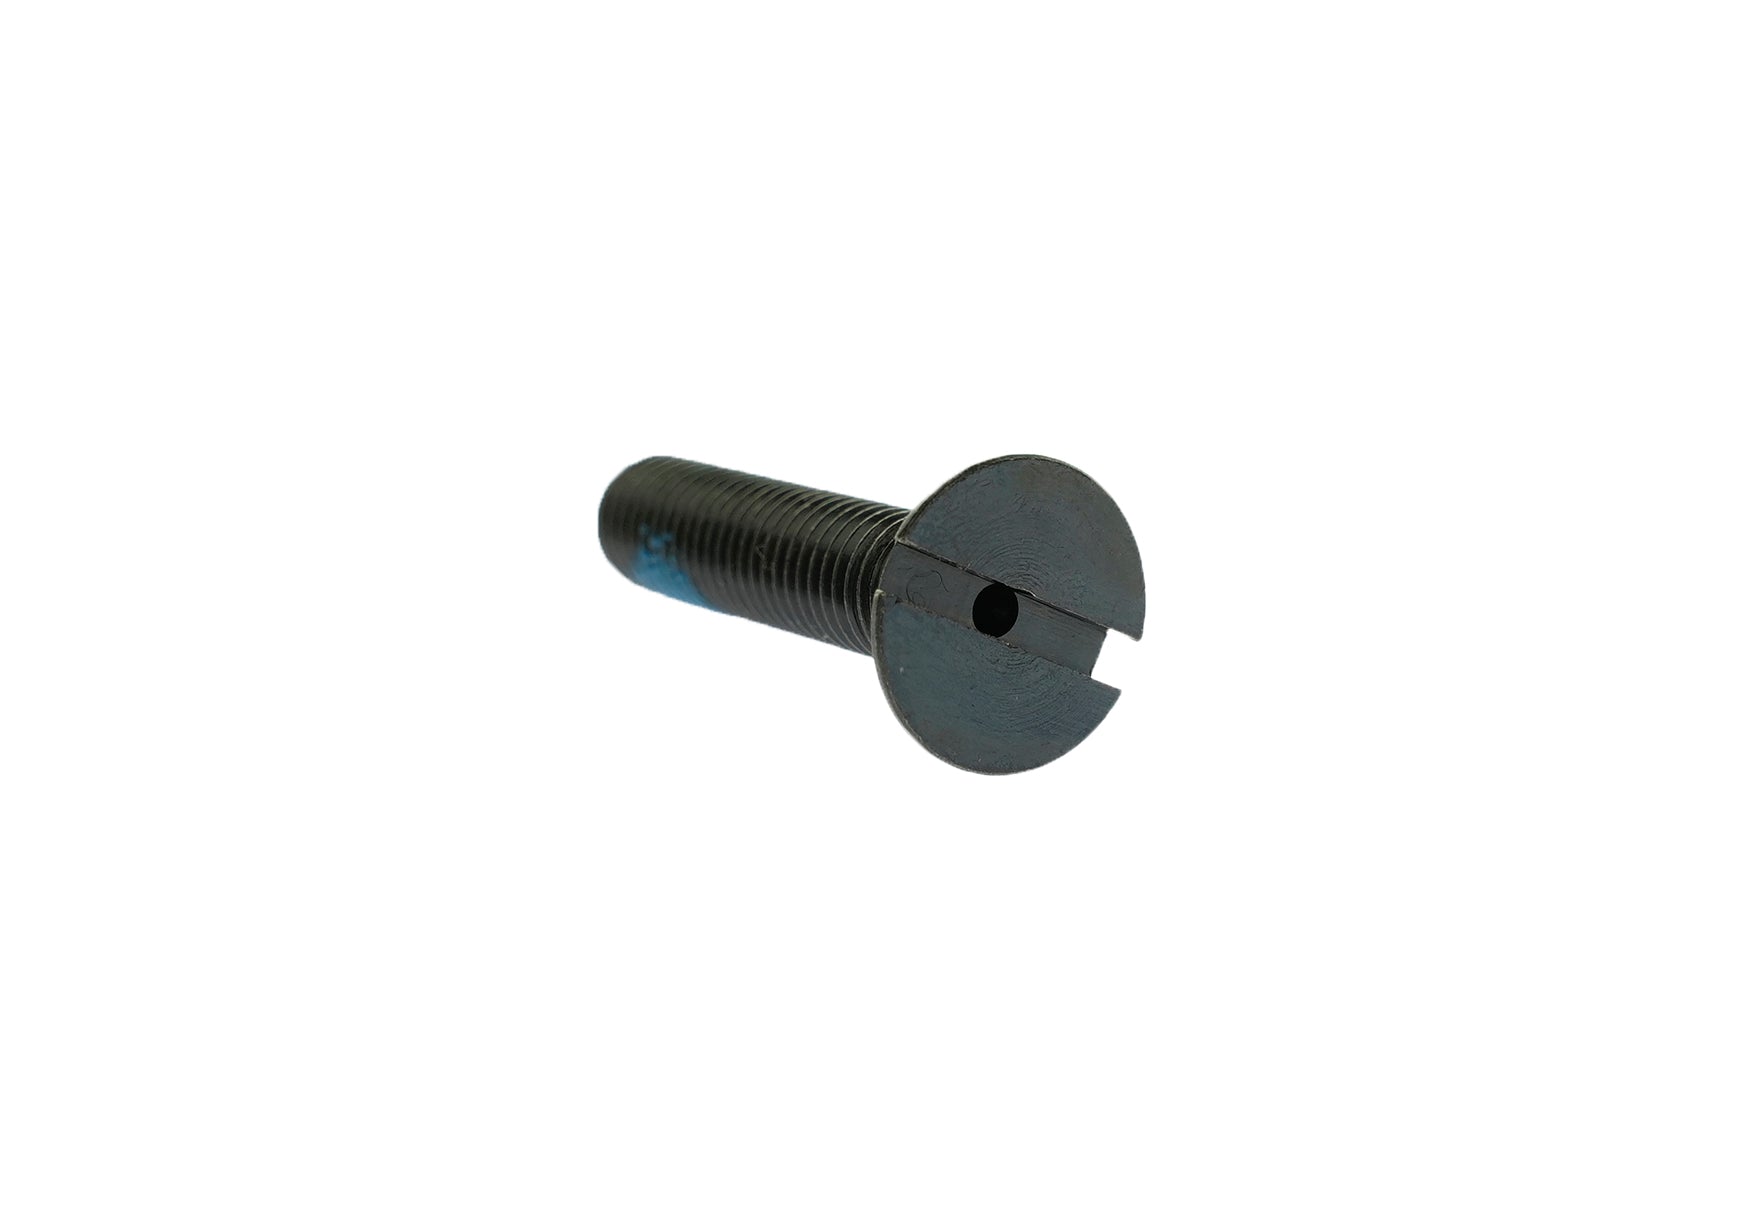 DNA M16A2 Steel Inches Buffer Tube Screw